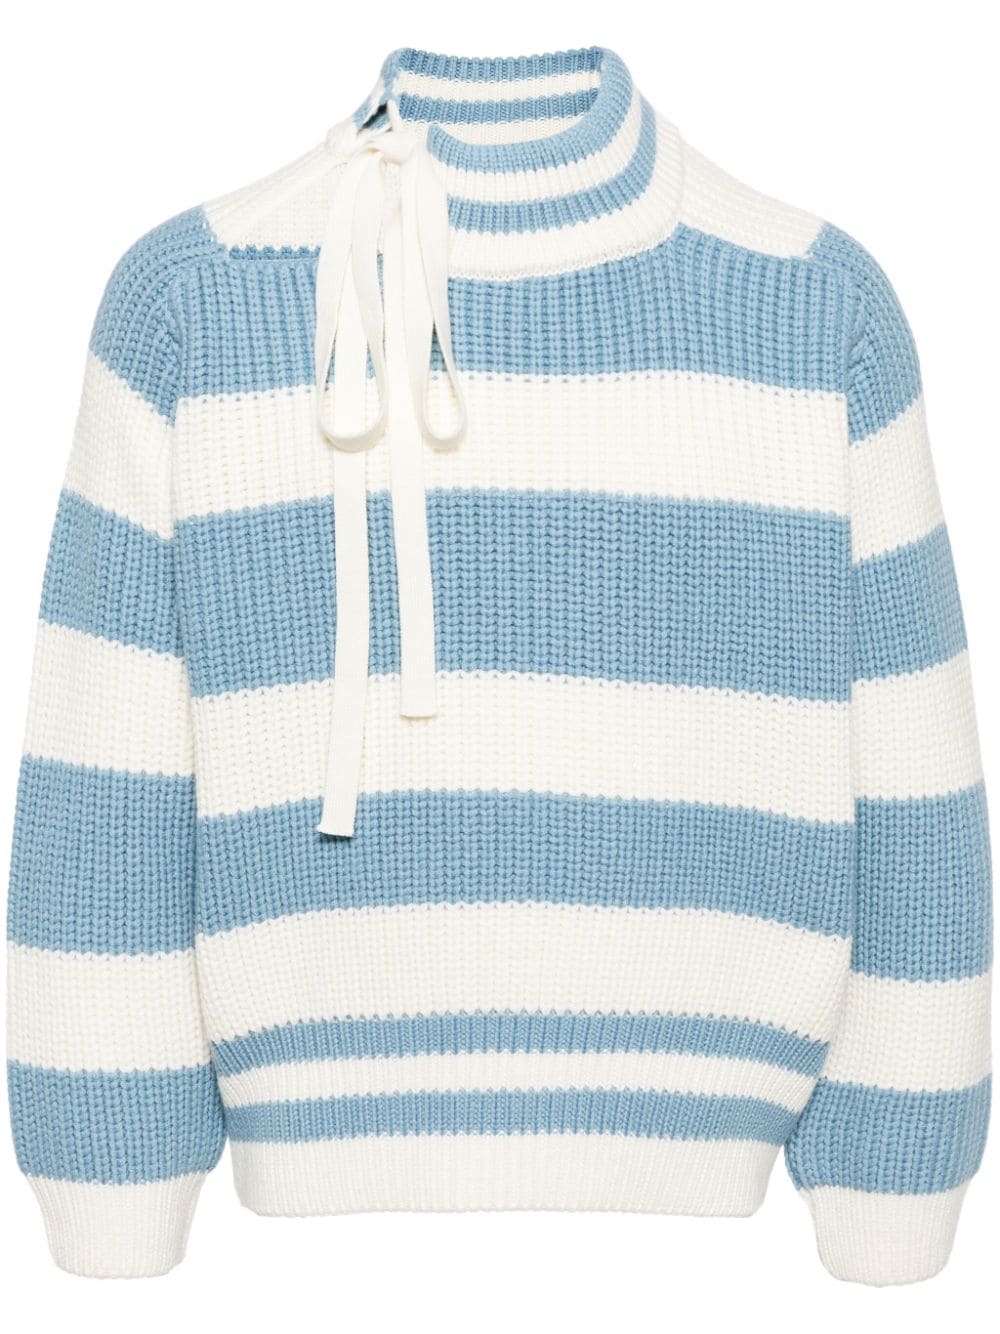 S.S.DALEY Lawrence striped jumper - Blue von S.S.DALEY